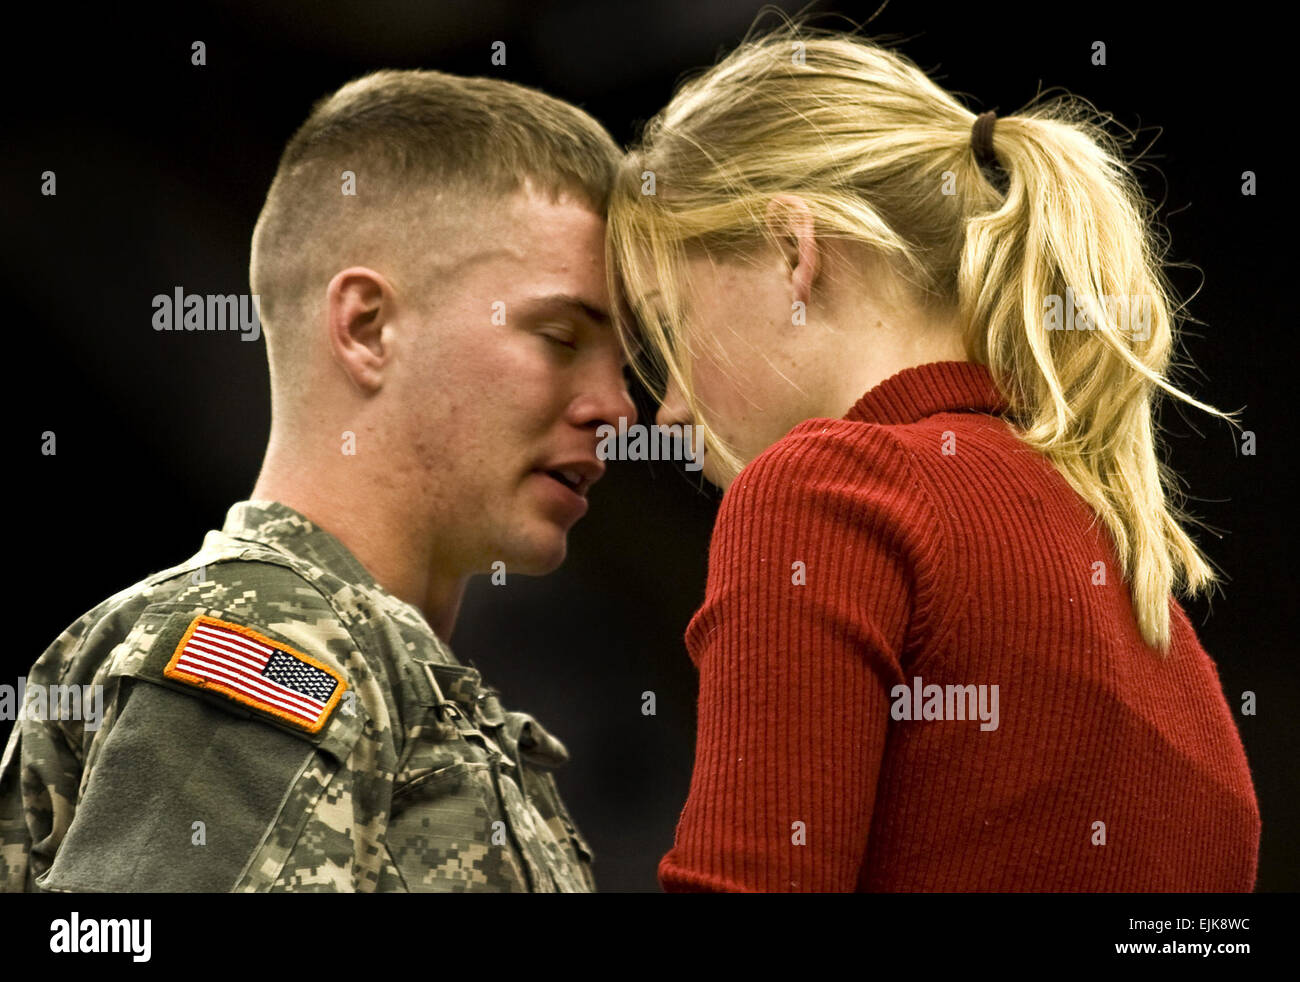 U.S. Army Spc. Christopher Ruppel, of the 76th Infantry Brigade Combat Team, says goodbye to Sammy Fischer prior to the start of the brigade's departure ceremony at the RCA Dome in Indianapolis, Ind., Jan. 2, 2008. With more than 3,400 Soldiers from approximately 30 Indiana communities deploying for a 12-month tour in Iraq, this is the largest Indiana National Guard deployment since World War II.  Capt. Greg Lundenberg Stock Photo